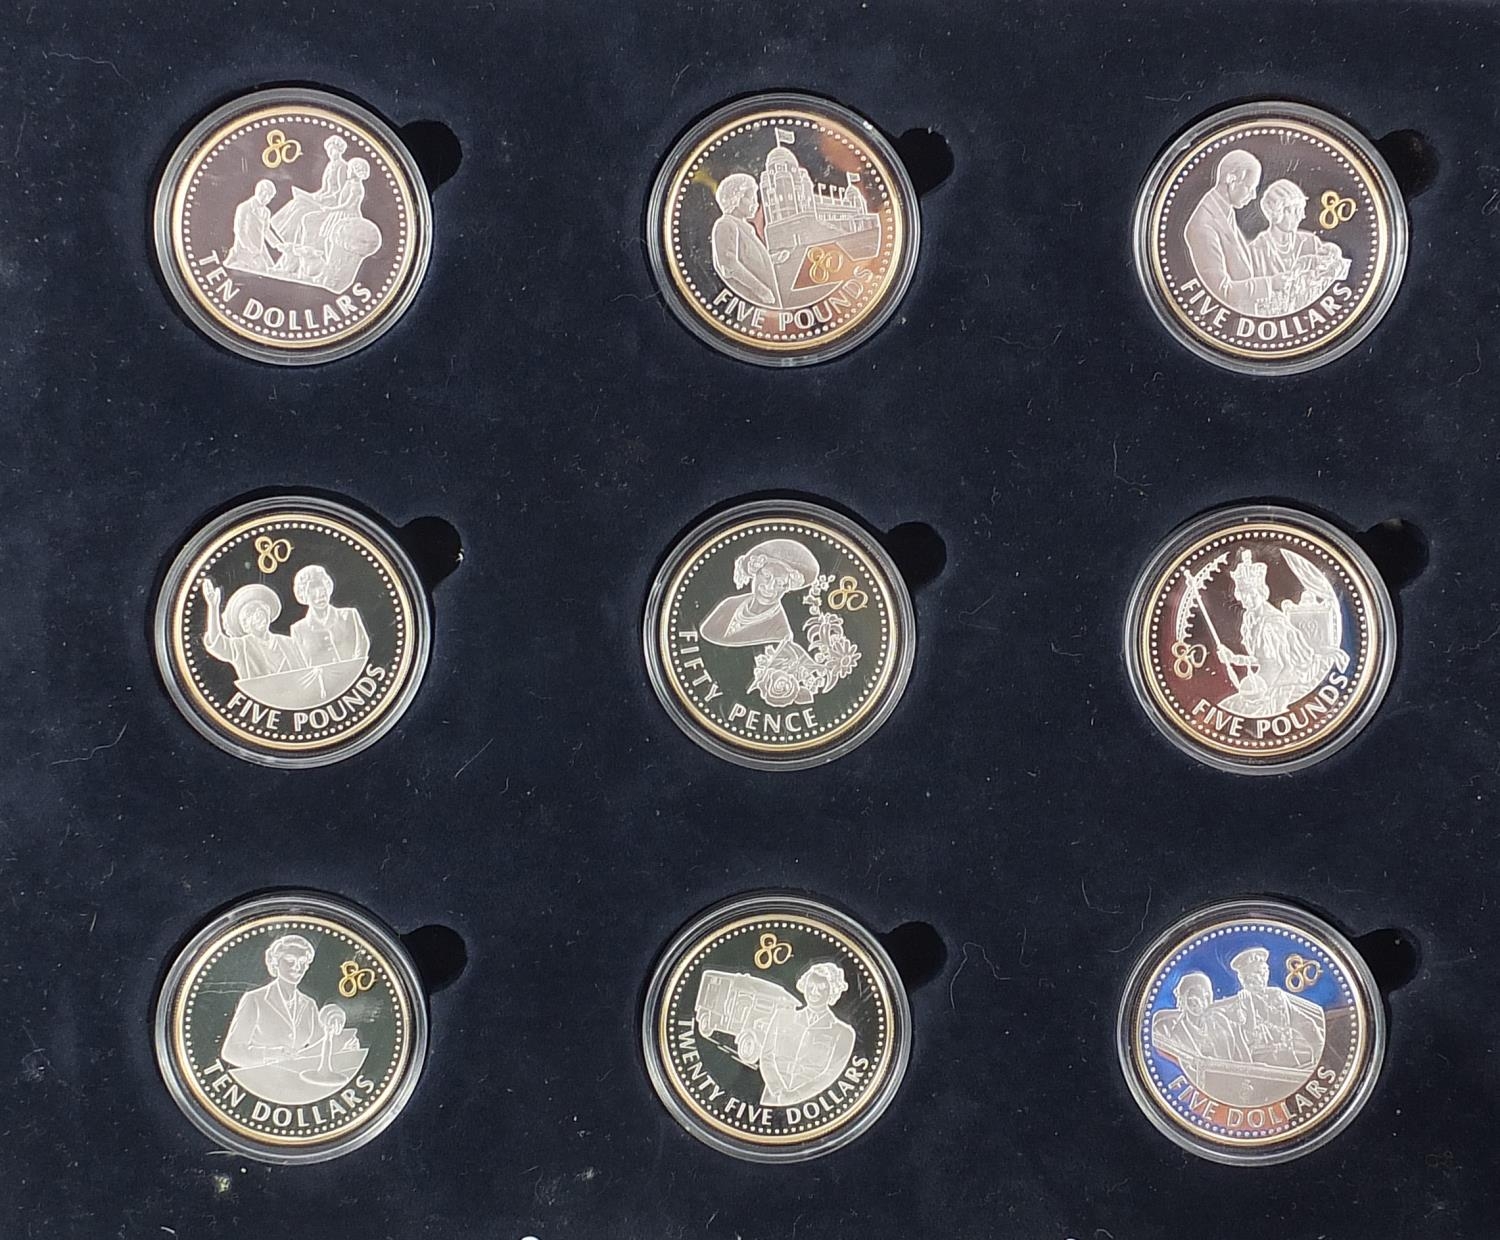 Seventeen silver proof coins by The Royal Mint commemorating the Queen's 80th birthday, arranged - Bild 2 aus 5